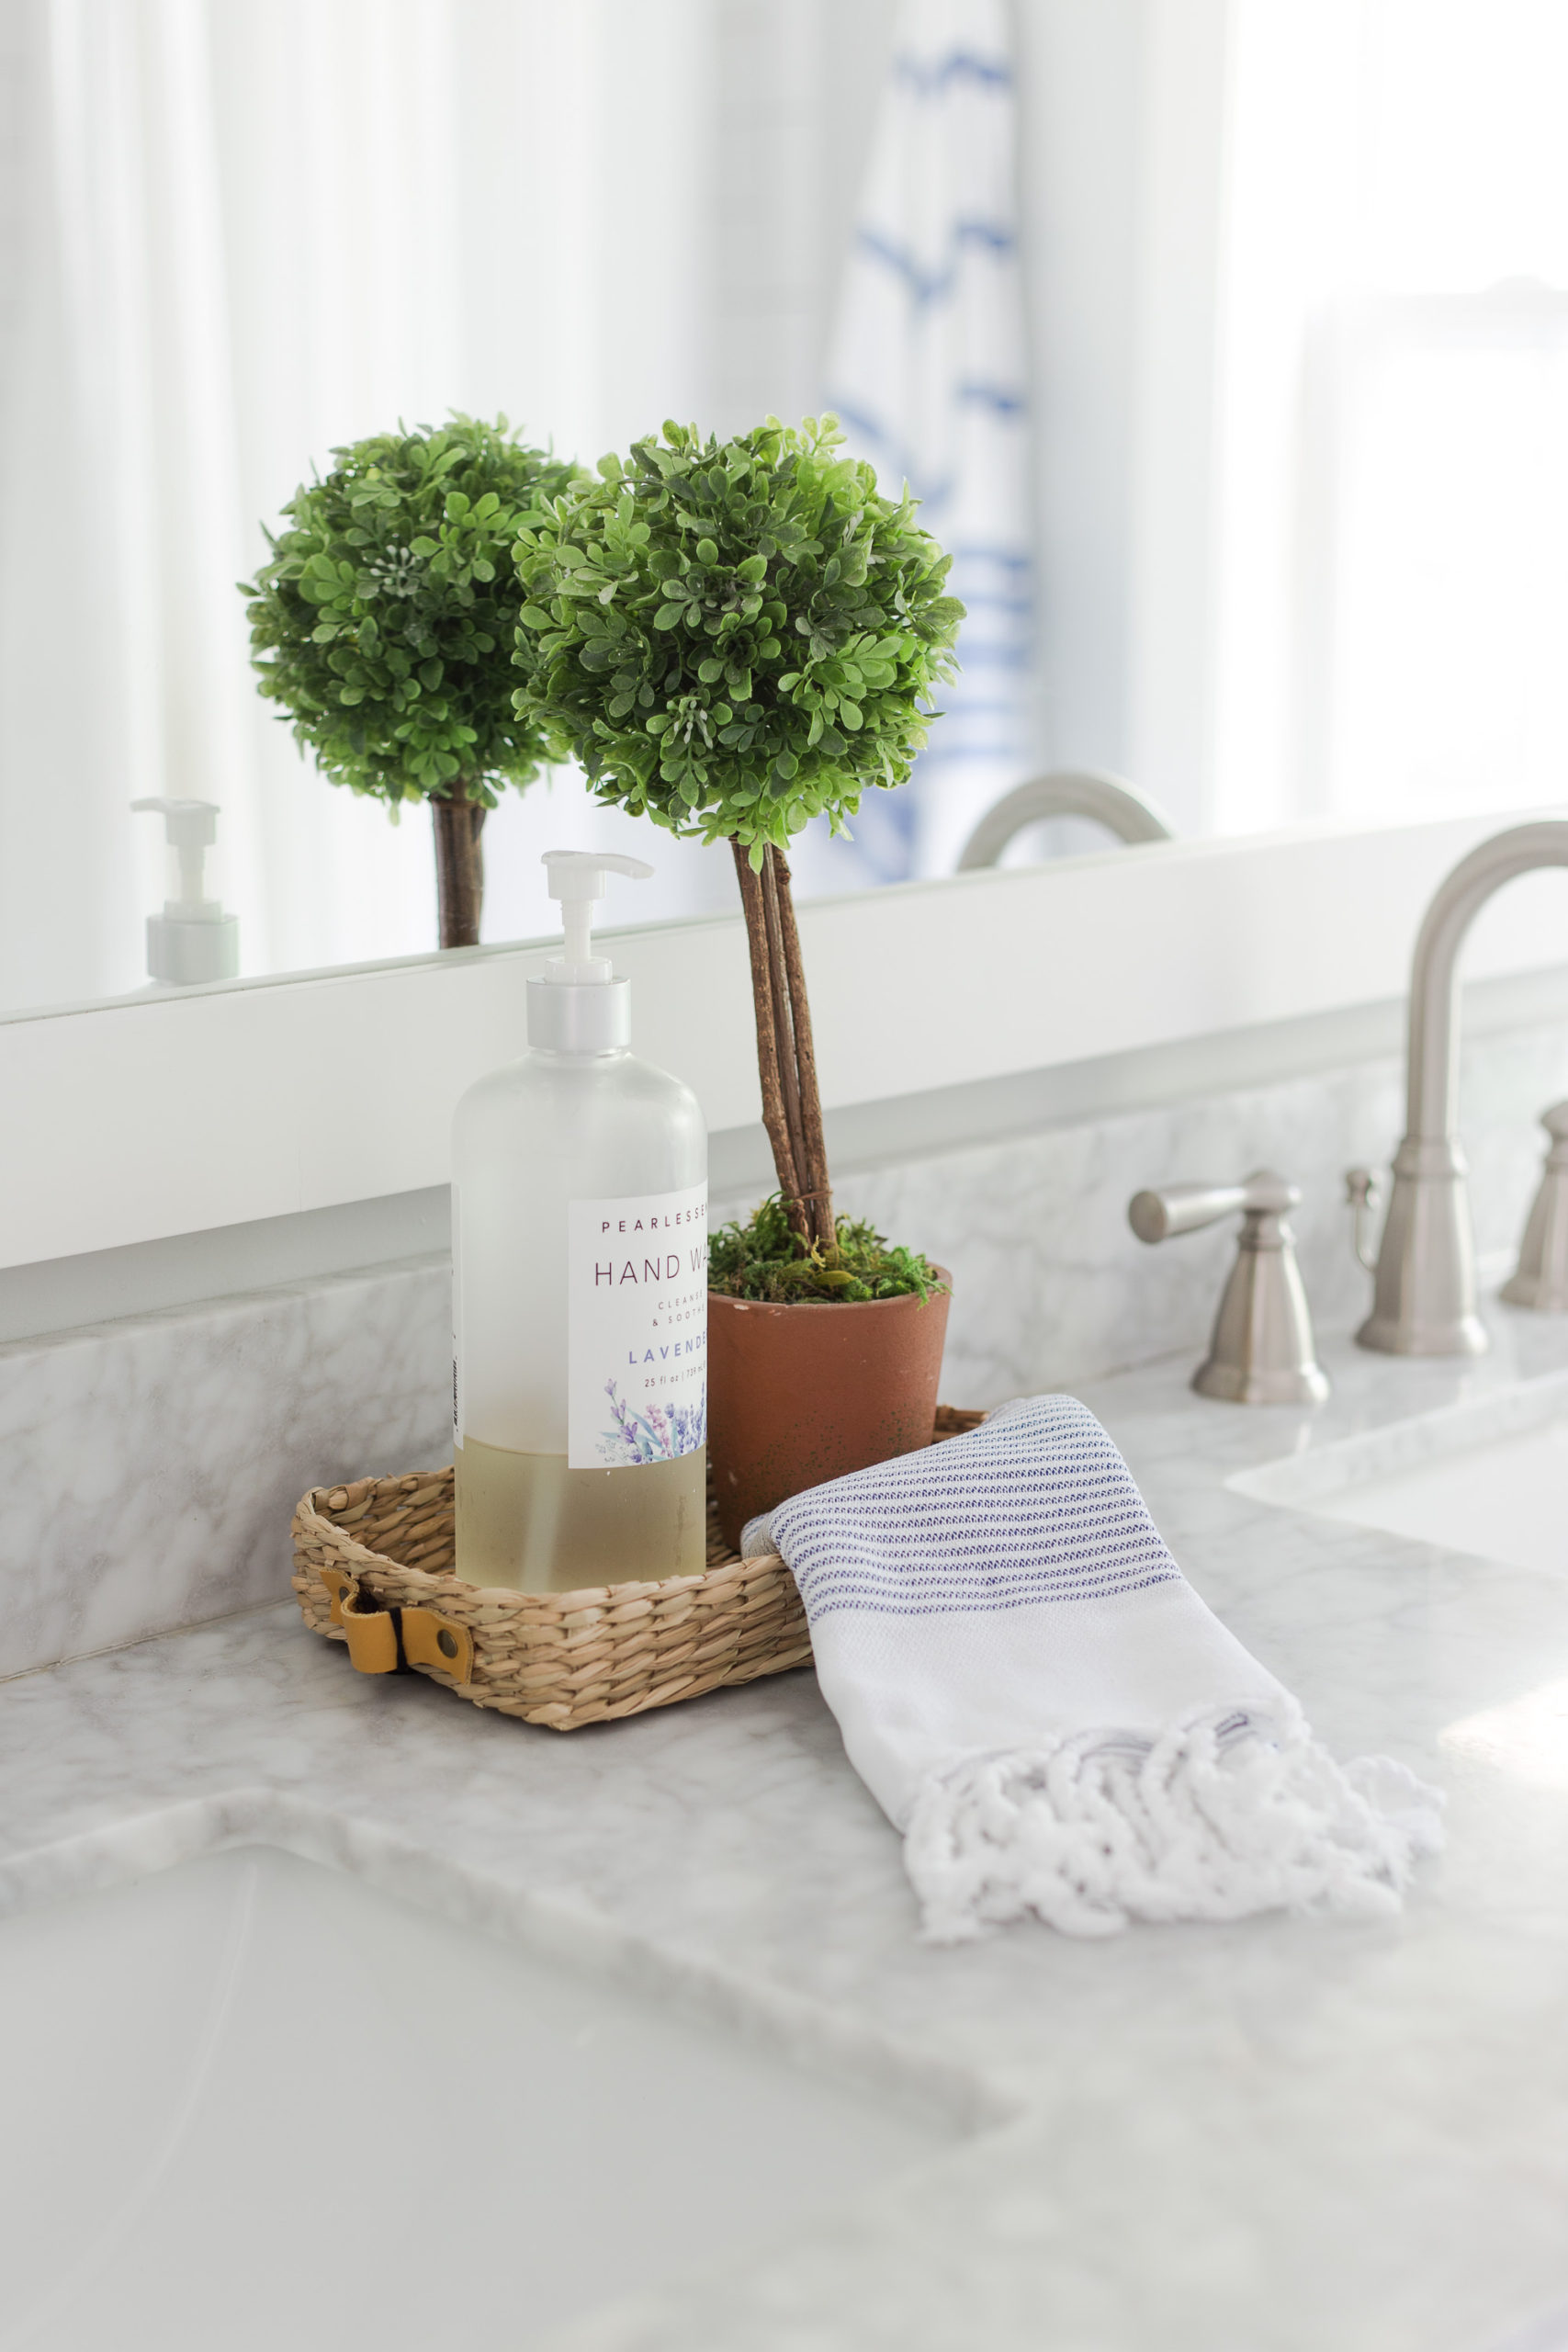 Jar of hand soap, and green topiary sitting in a small rattan tray with towel sitting on a bathroom countertop